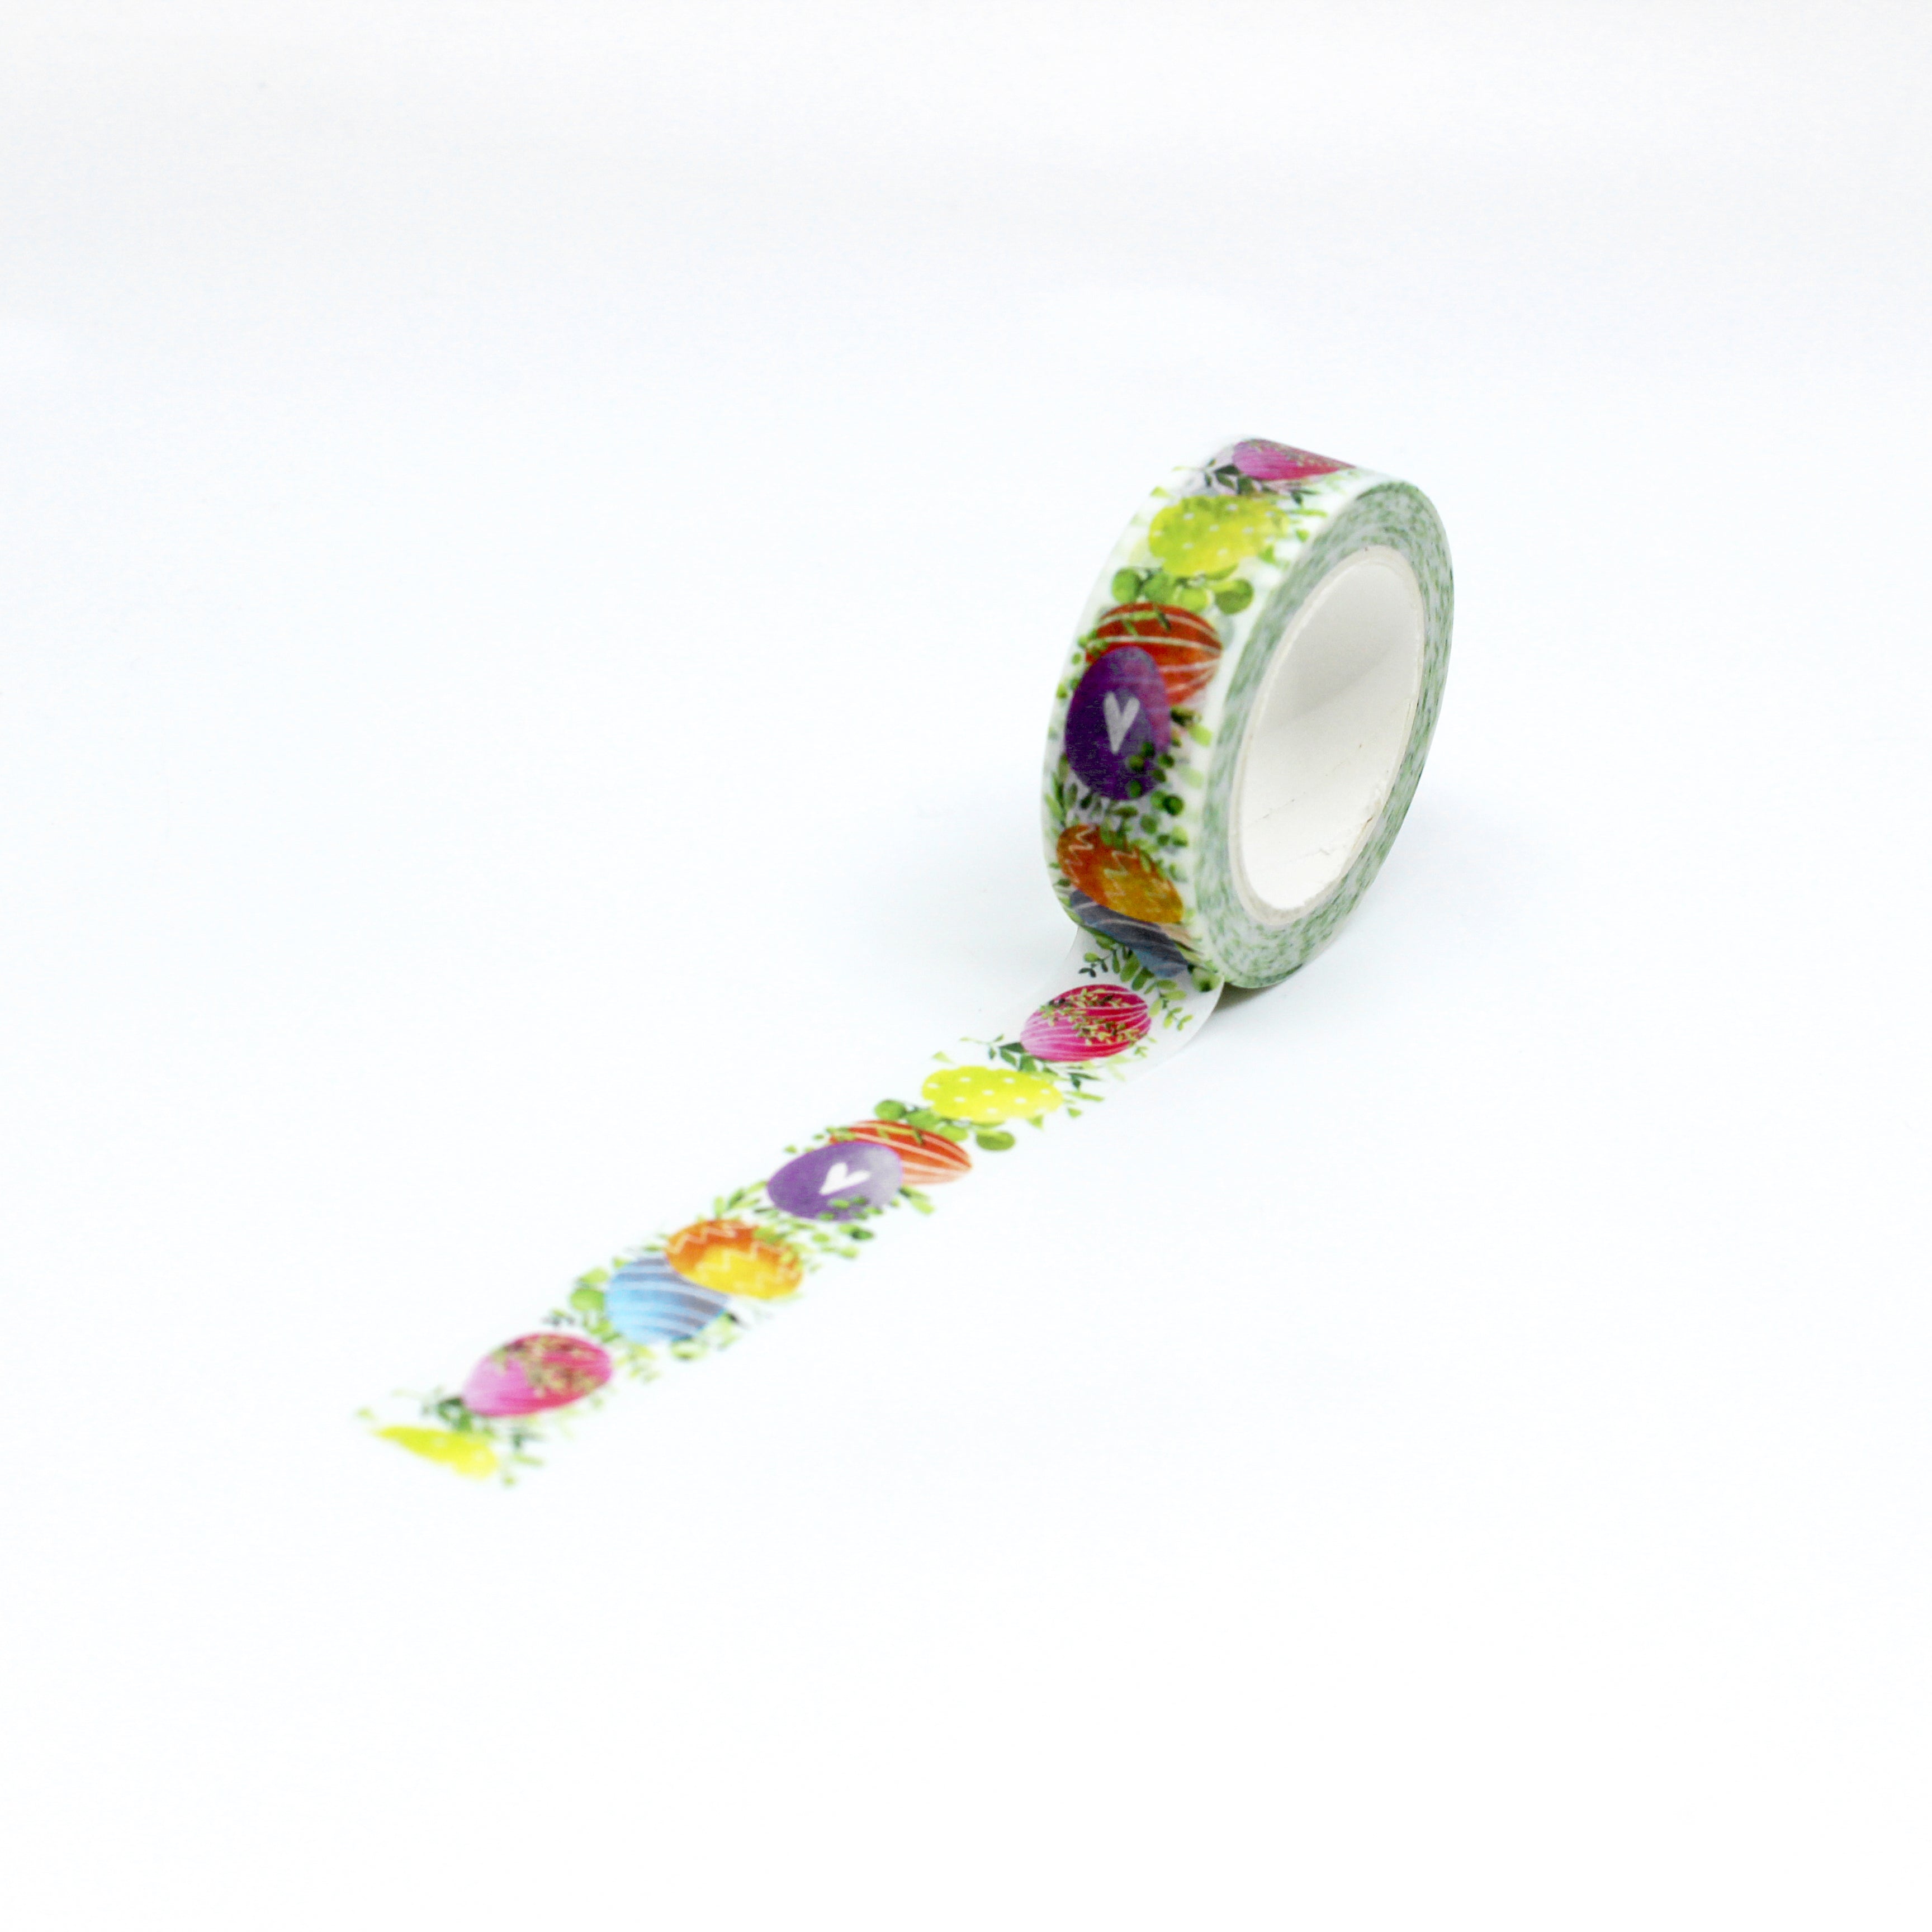 Easter Egg on Grass Washi Tape: Celebrate the season with this charming washi tape featuring colorful Easter eggs nestled in lush green grass, perfect for Easter-themed crafts and decorations. This cute tape is sold at BBB Supplies Craft Shop.